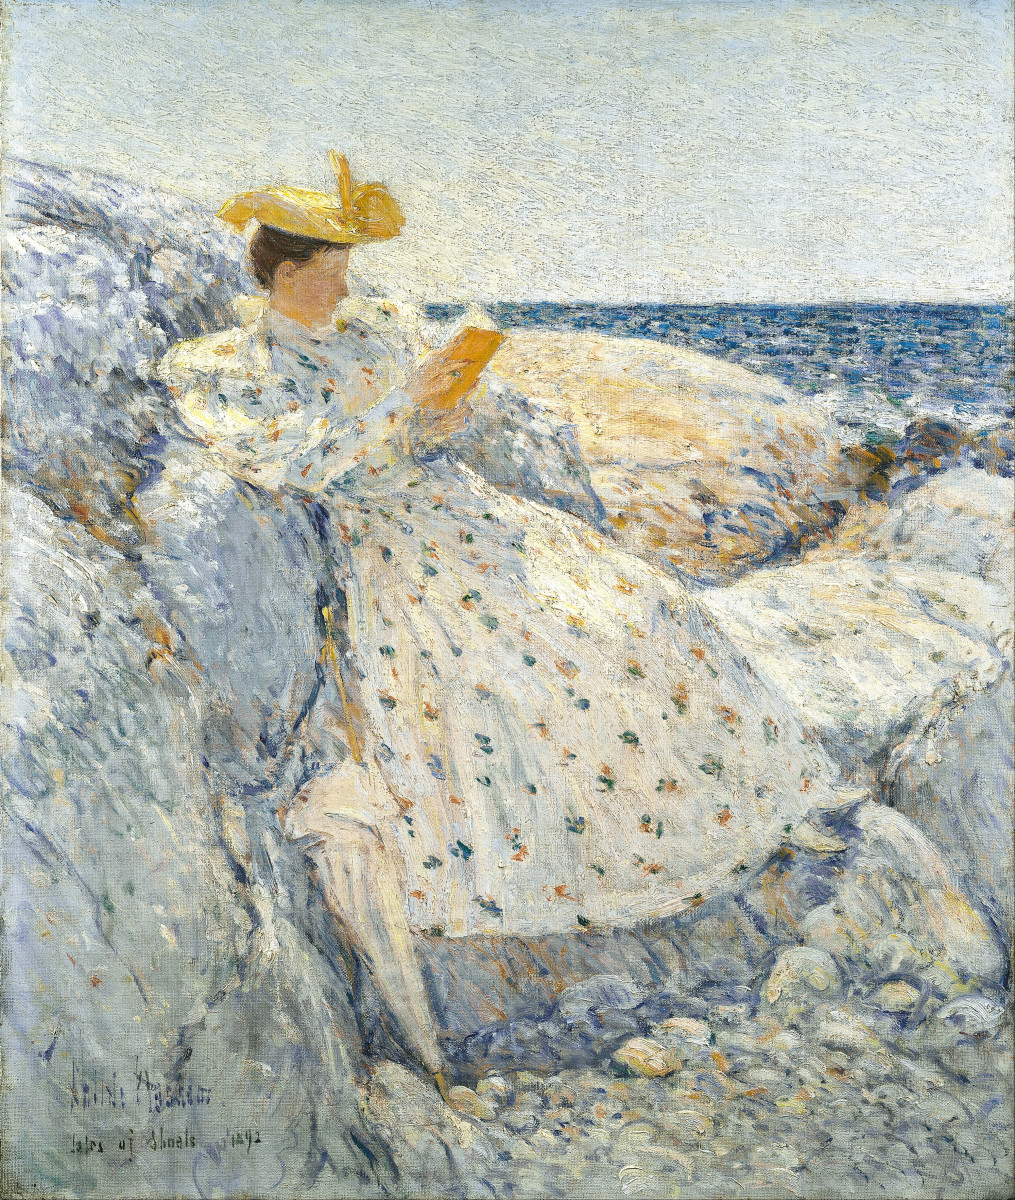 Summer Sunlight (Isles of Shoals) by Childe Hassam oil on canvas (1892)